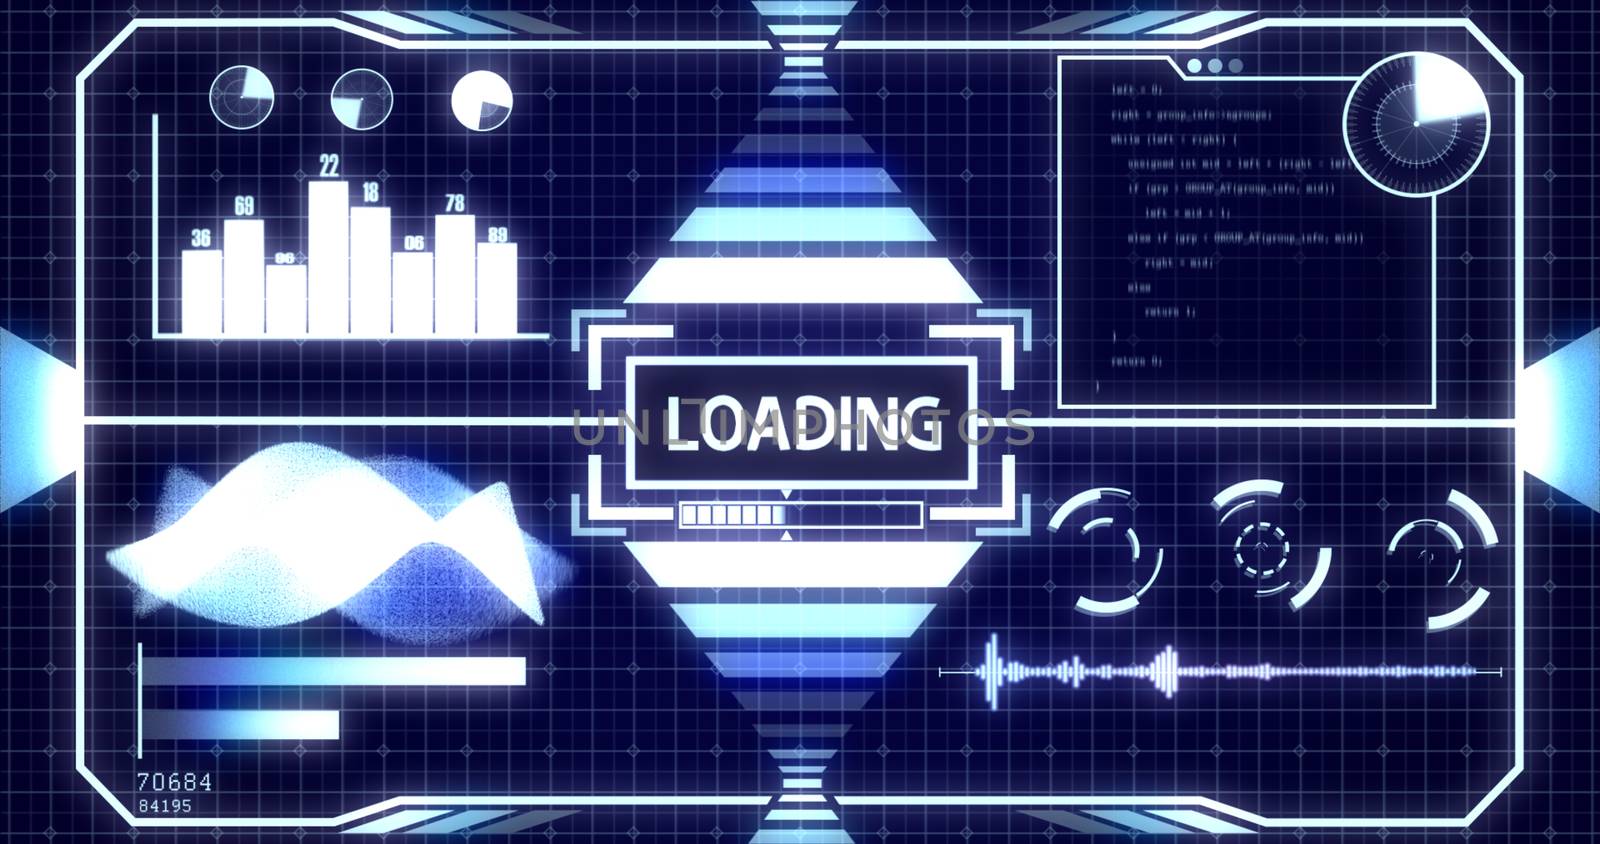 Loading Screen with Process Bar and Digital objects including Soundwave, Graph, Chart, Circles, Radar, Hacker typing and Glowing light bars Ver.1 (Full screen) by ariya23156